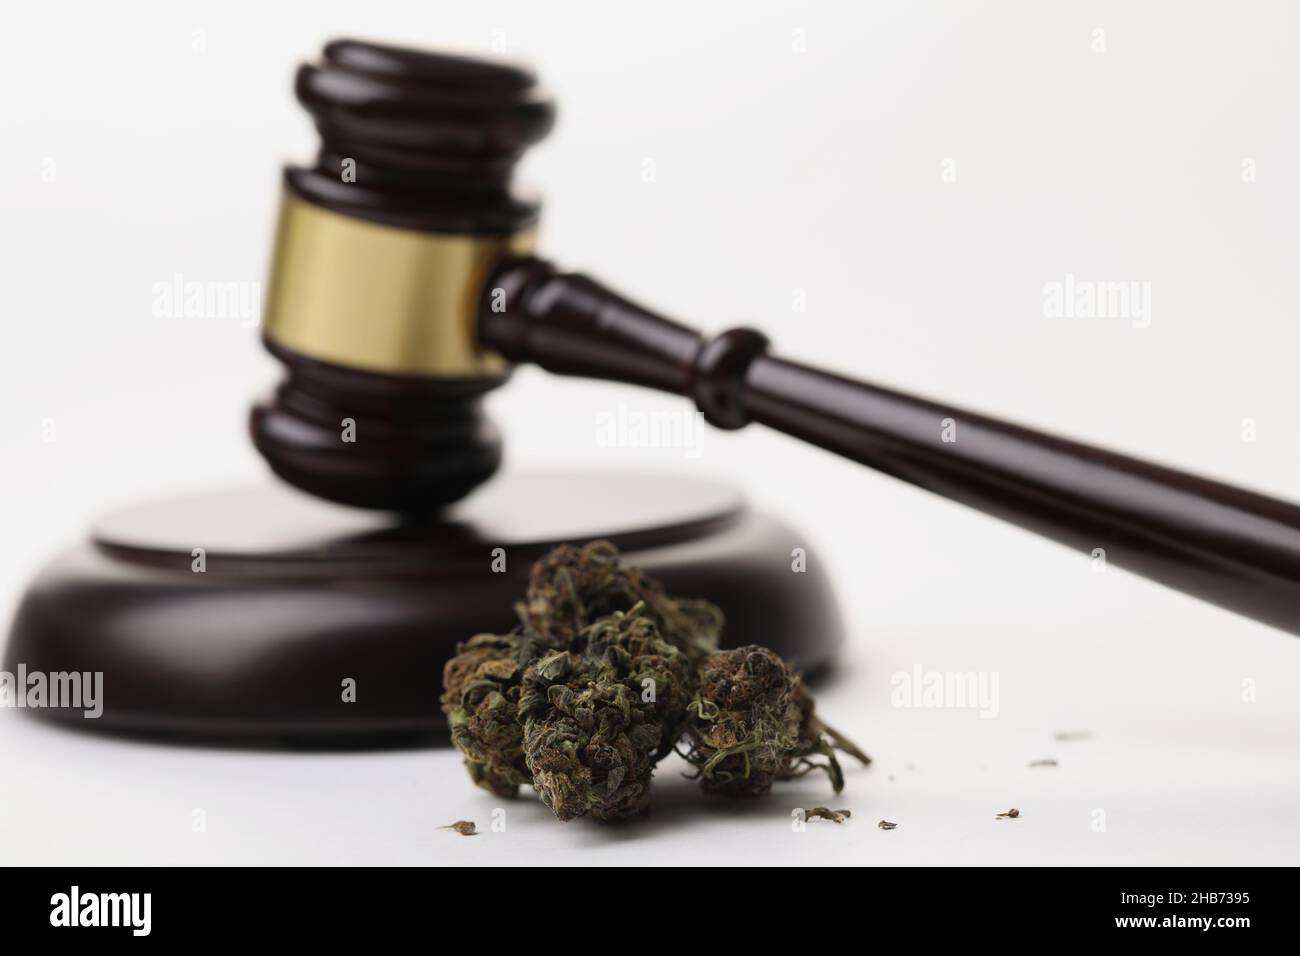 Cannabis herb buds and gavel as symbol of legalization of marijuana Stock Photo